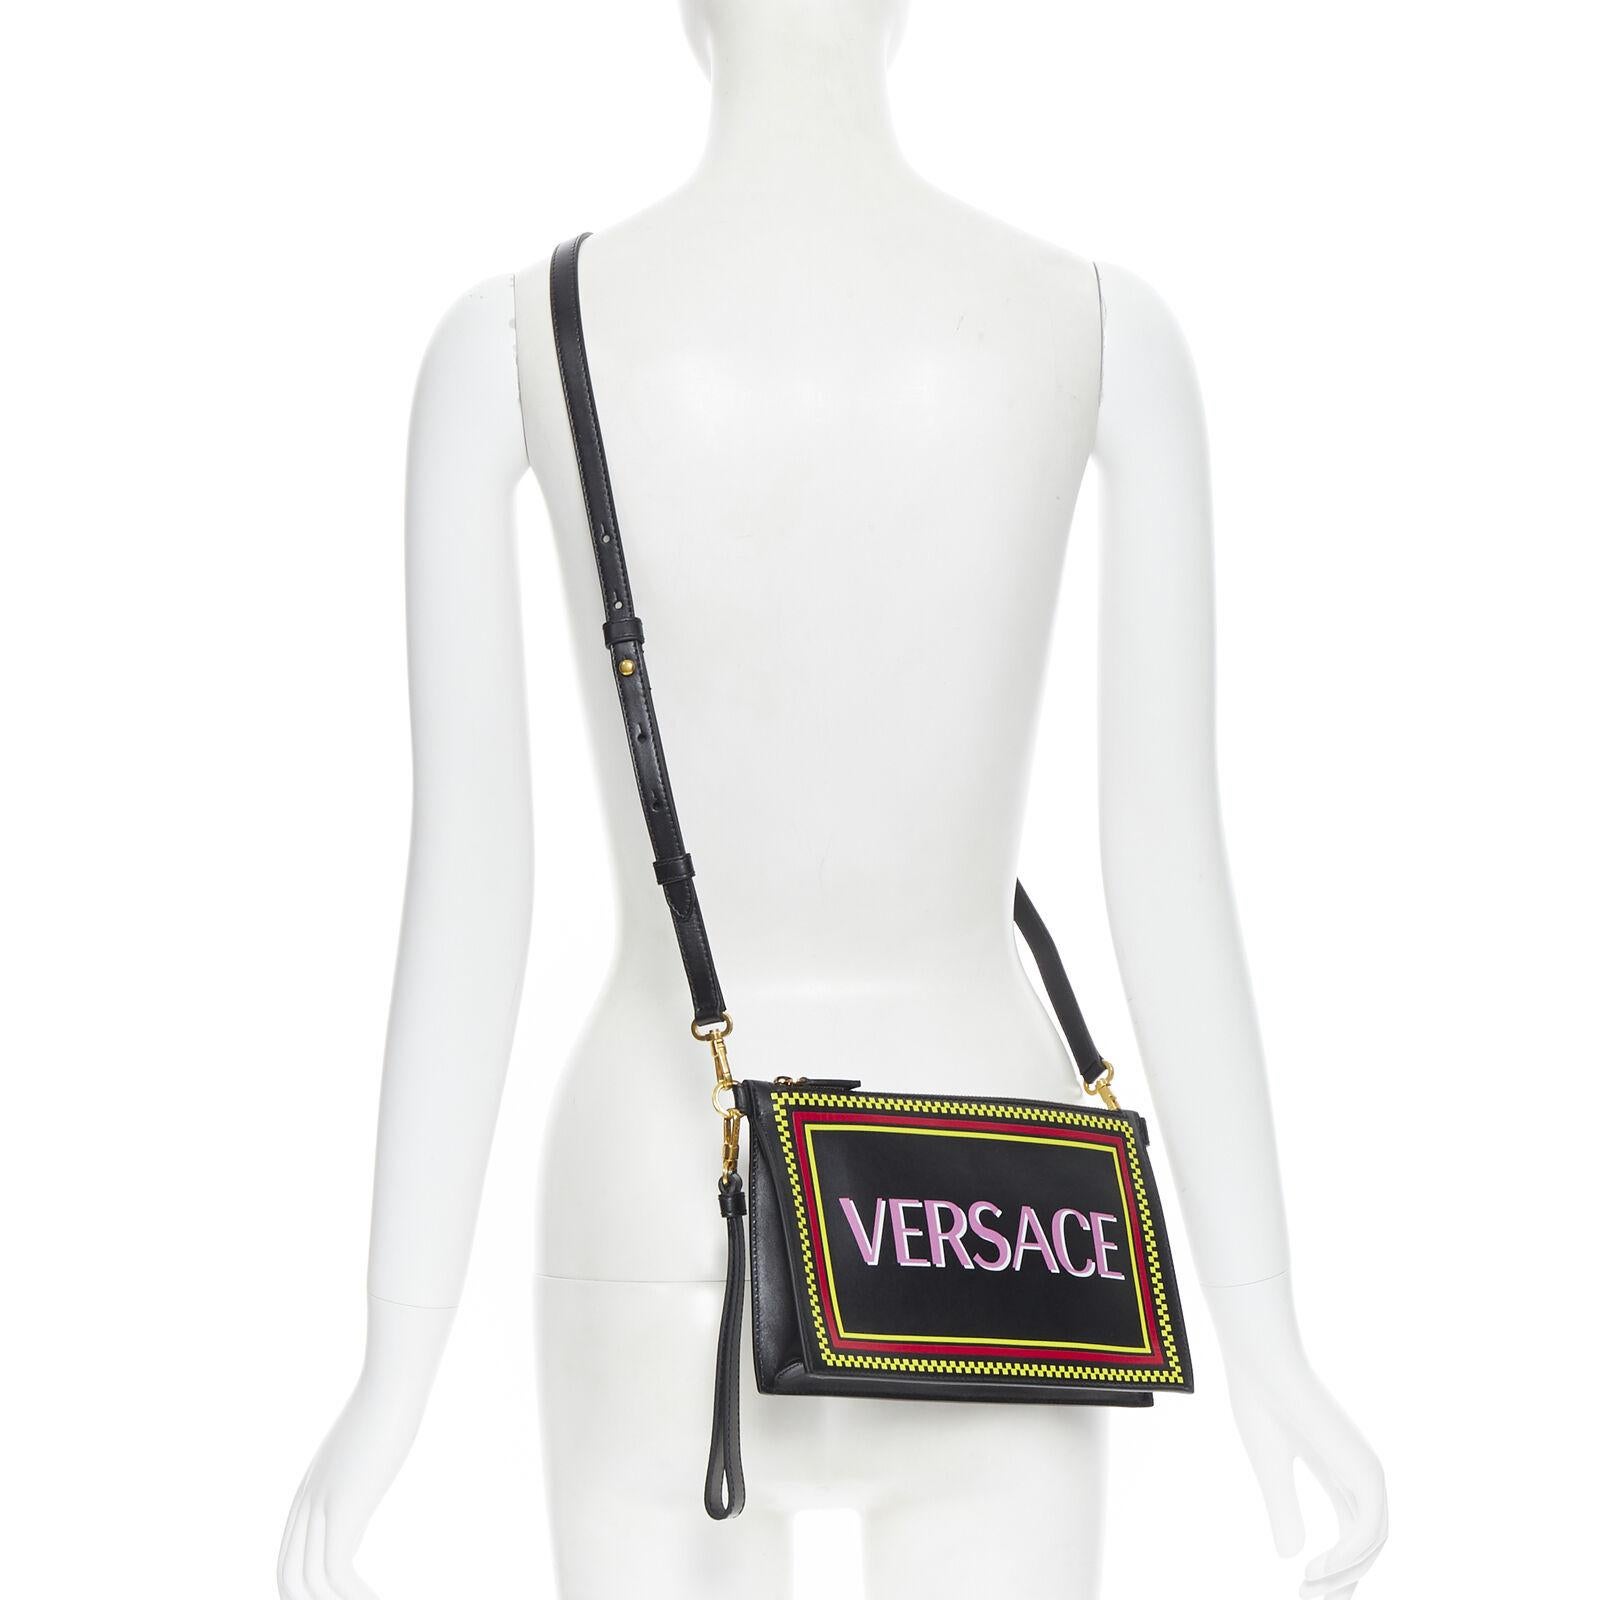 new VERSACE 90s graphic logo black calf zip pouch crossbody clutch bag
Reference: TGAS/B00507
Brand: Versace
Designer: Donatella Versace
Model: 90's logo top zip crossbody pouch
Collection: Vintage Logo 
Material: Leather
Color: Black
Pattern: